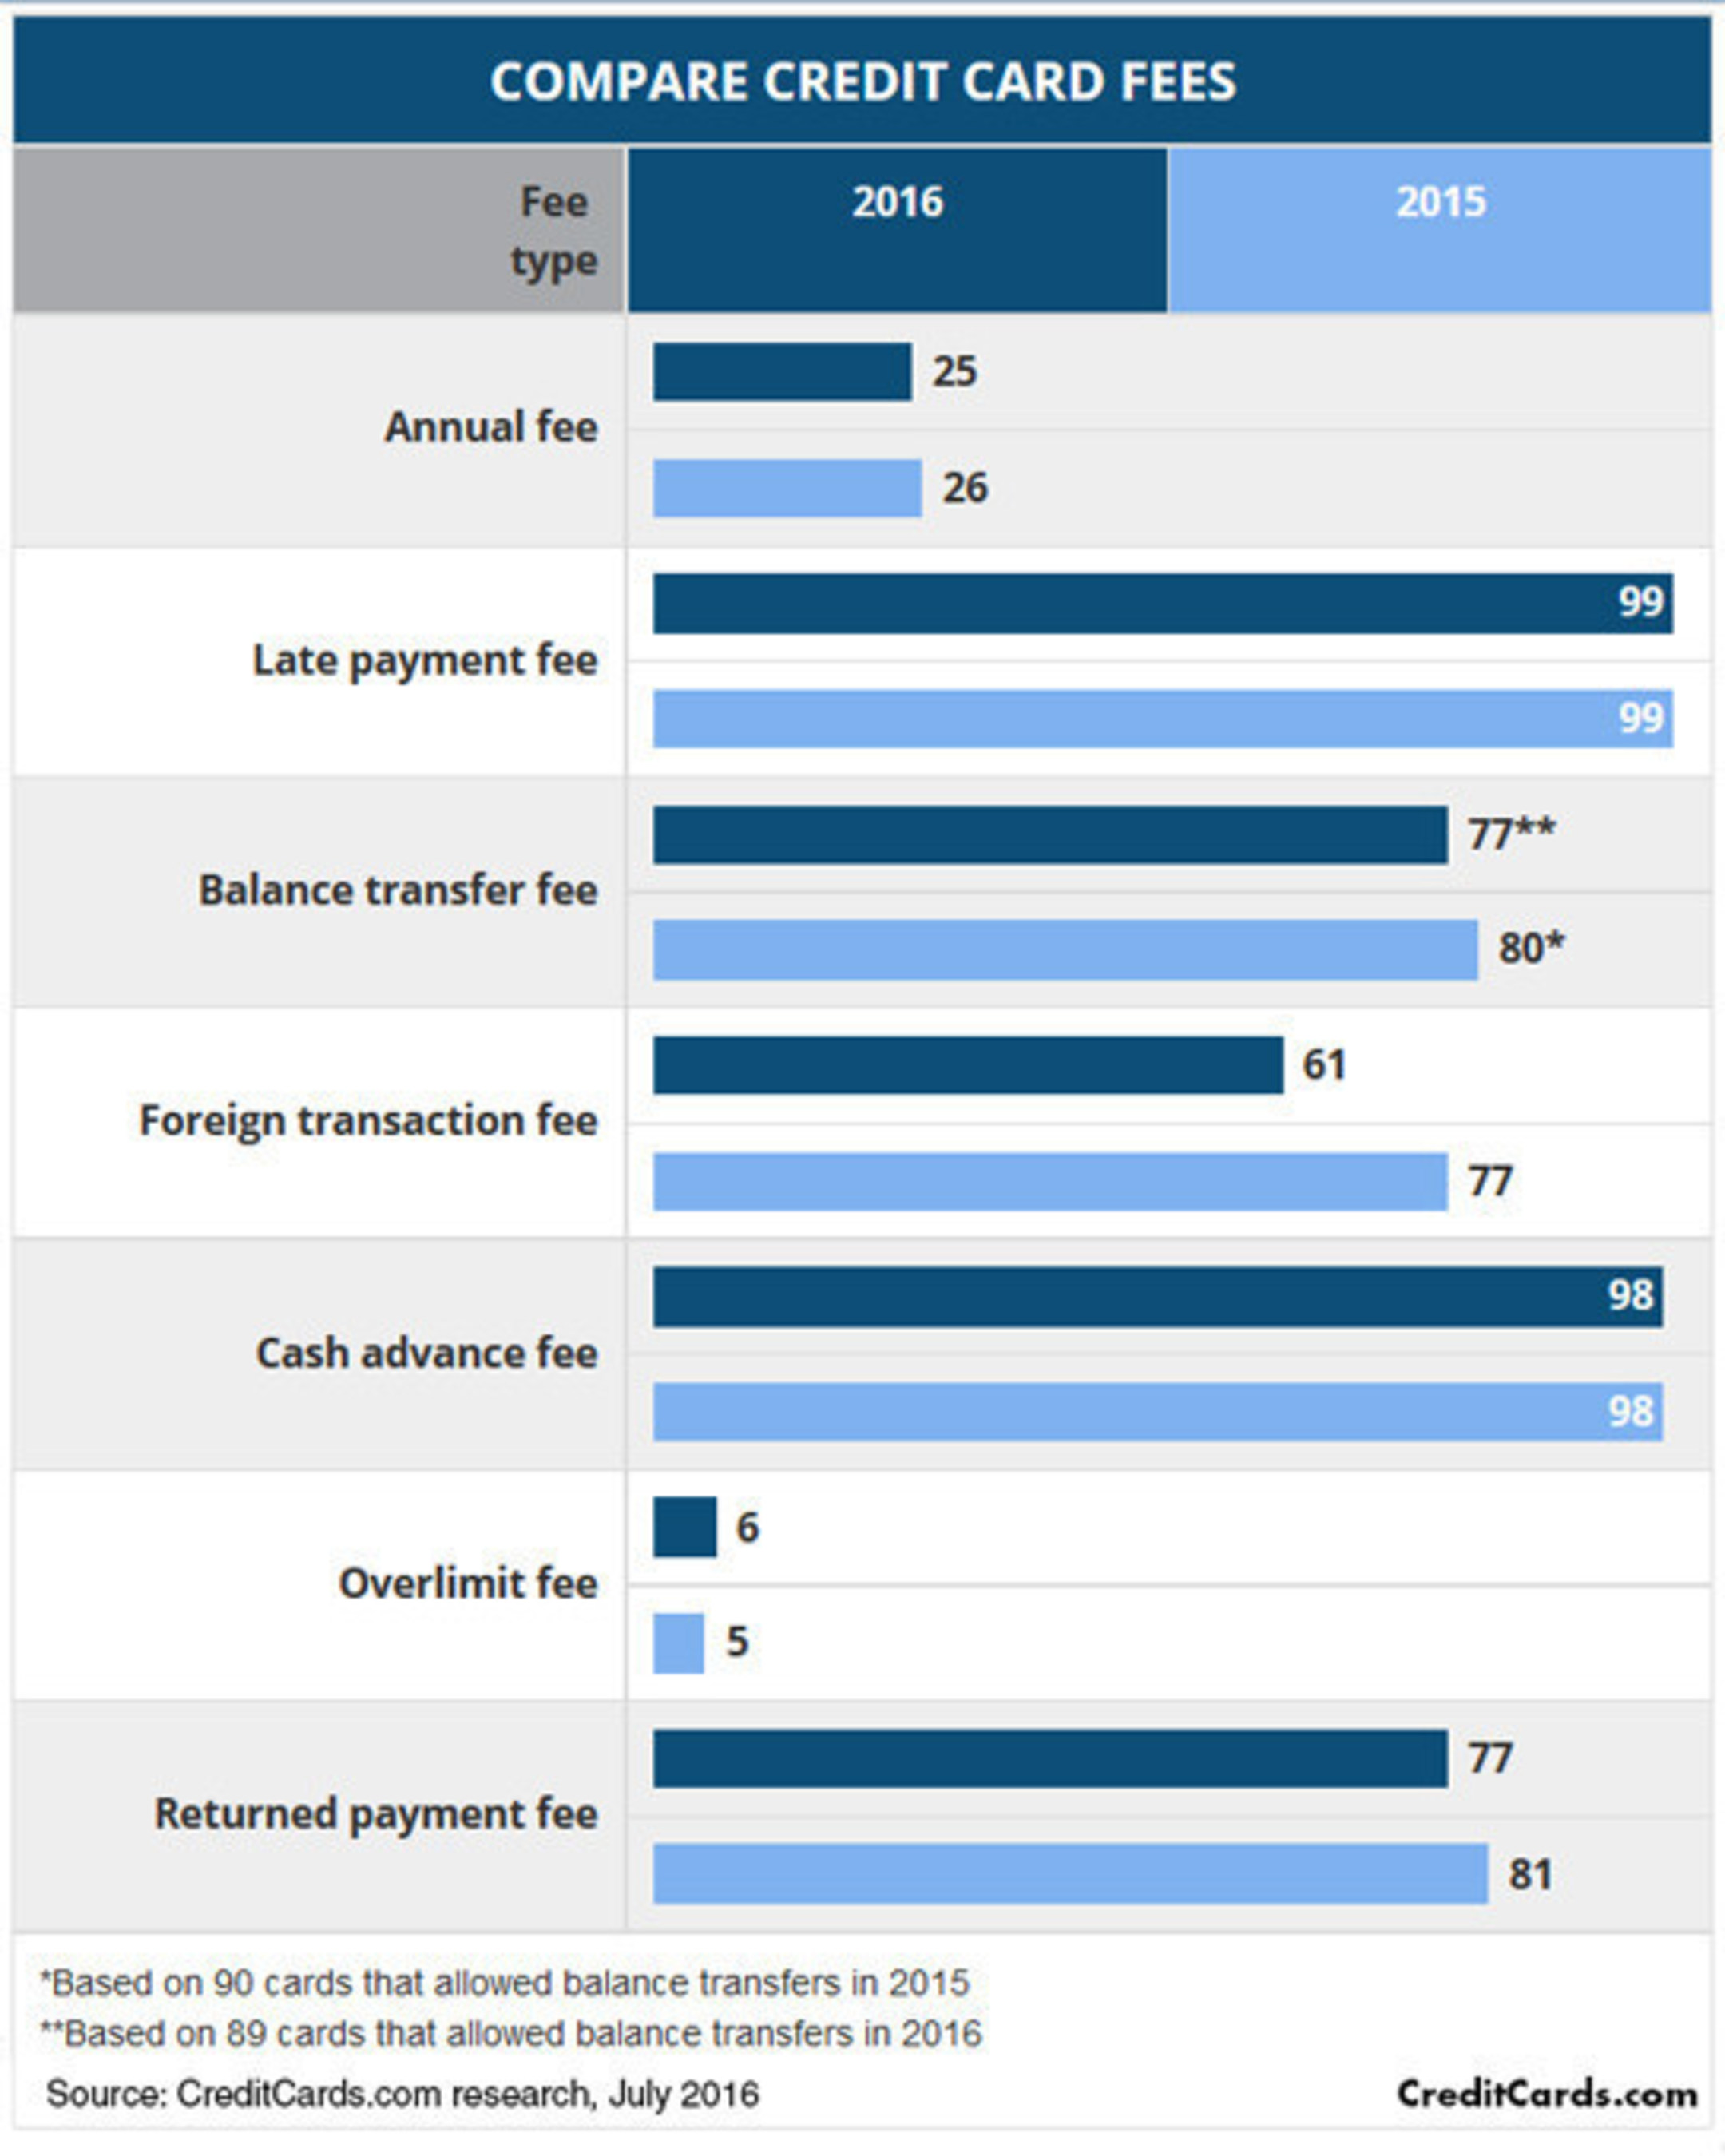 61 of 100 popular credit cards charge foreign transaction fees, down from 77 last year, according to a new CreditCards.com report. That illustrates an overall trend toward fewer fees: the 100 cards currently charge a total of 593 fees, down from 613 a year ago.